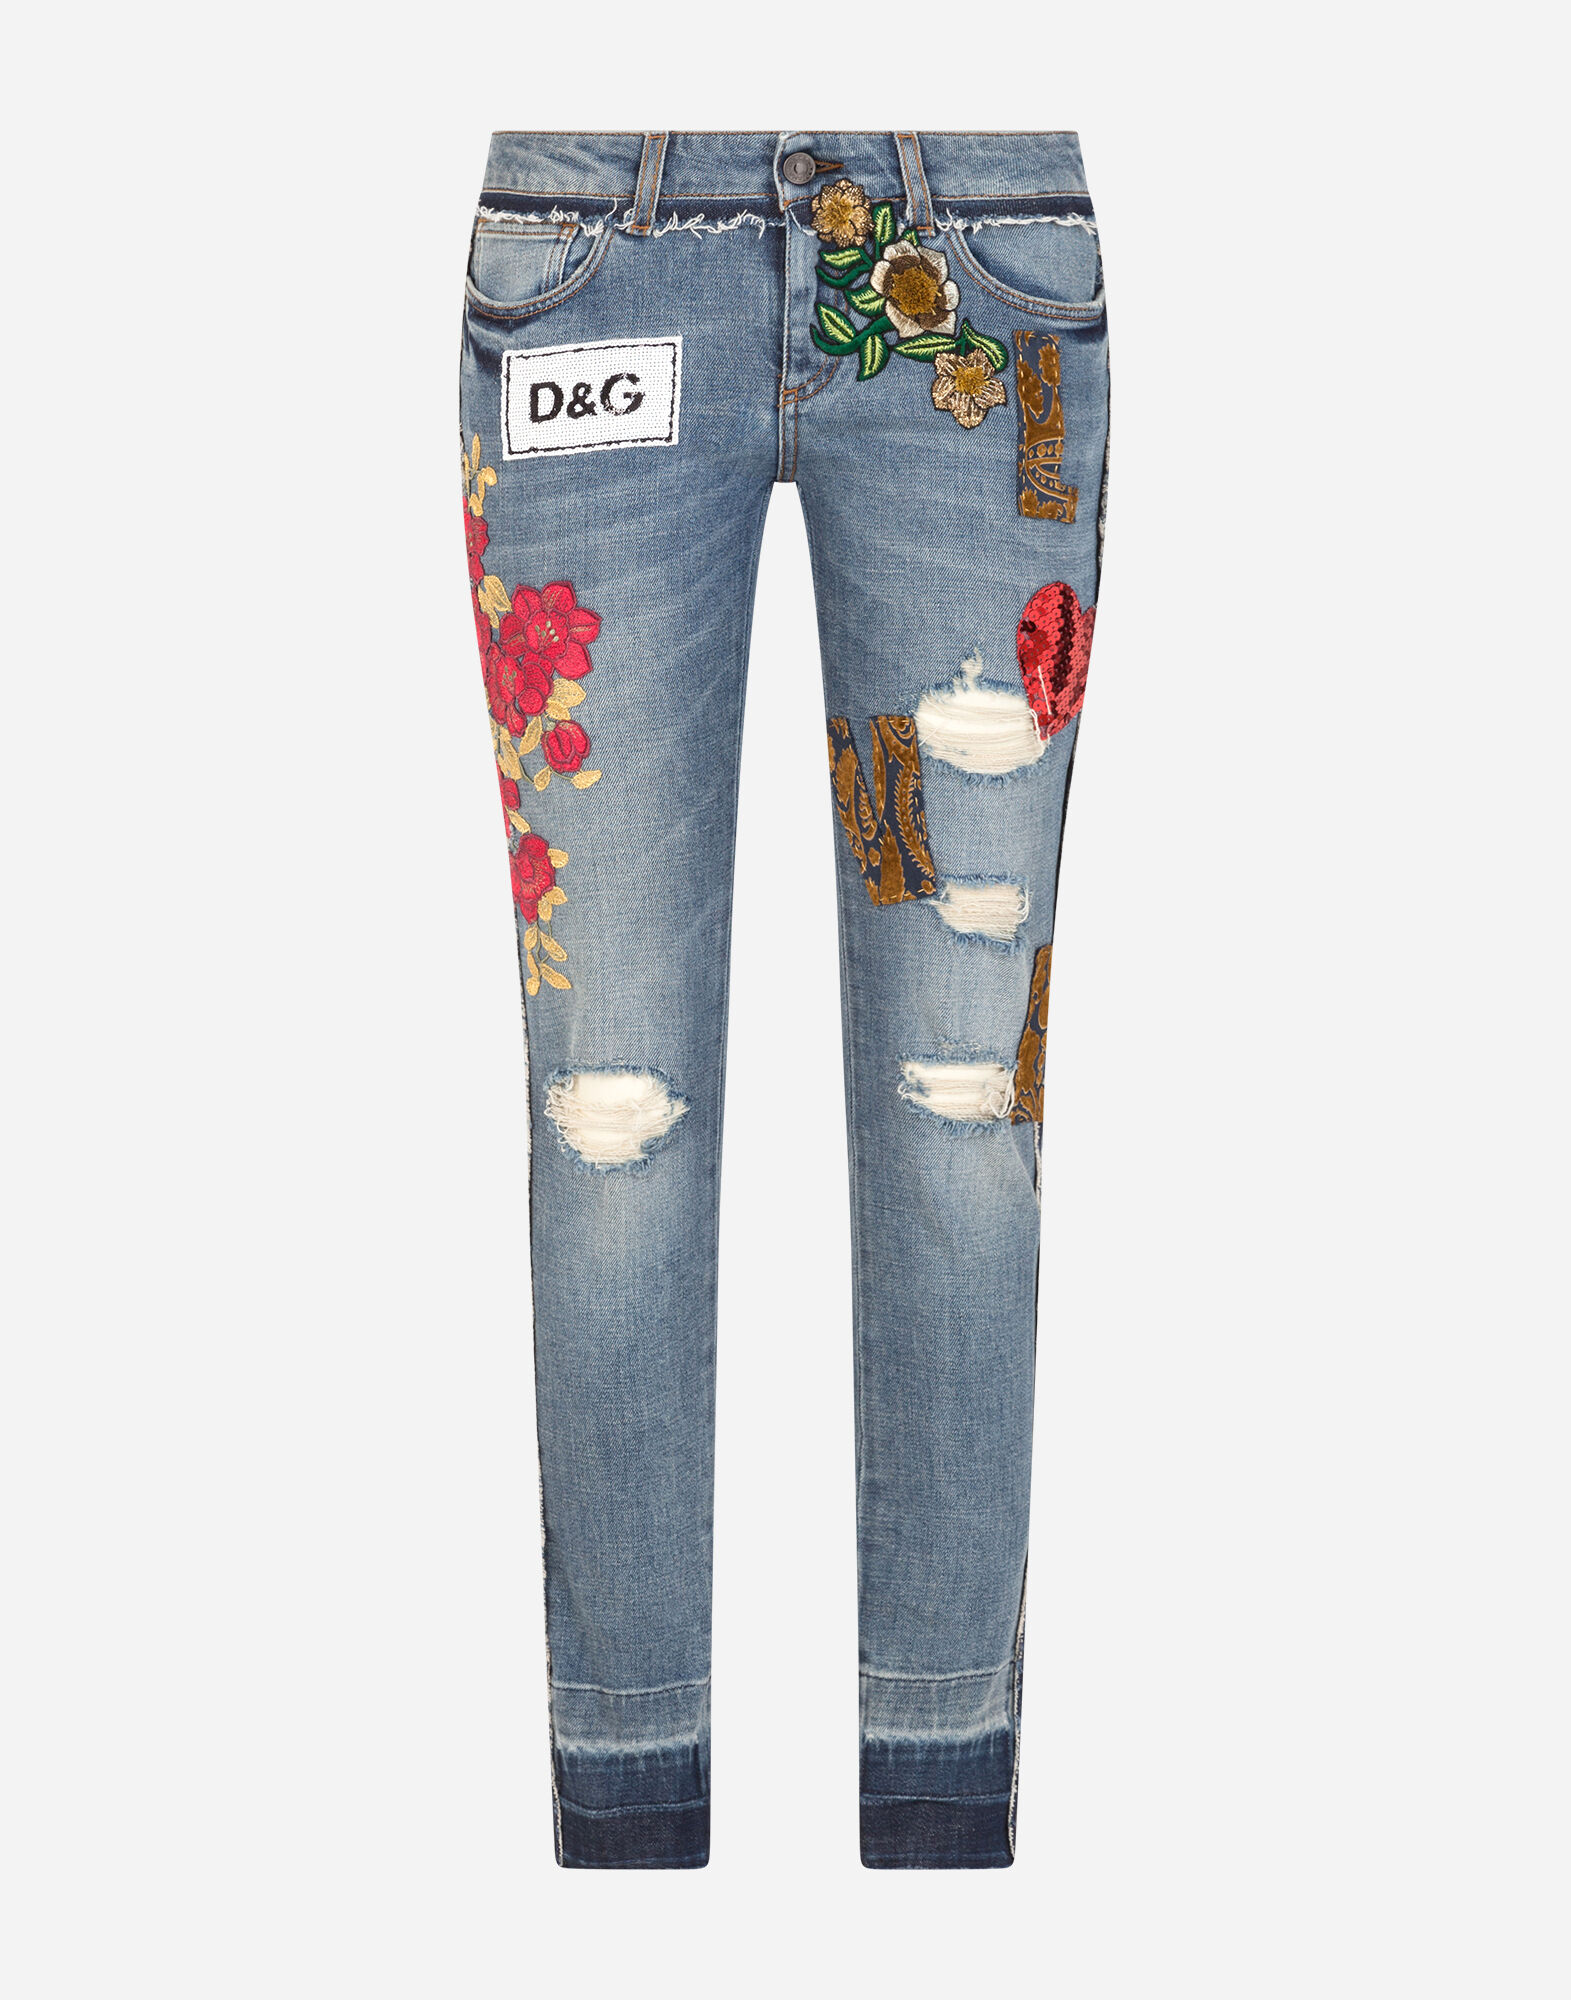 Denim jeans with patch embellishment